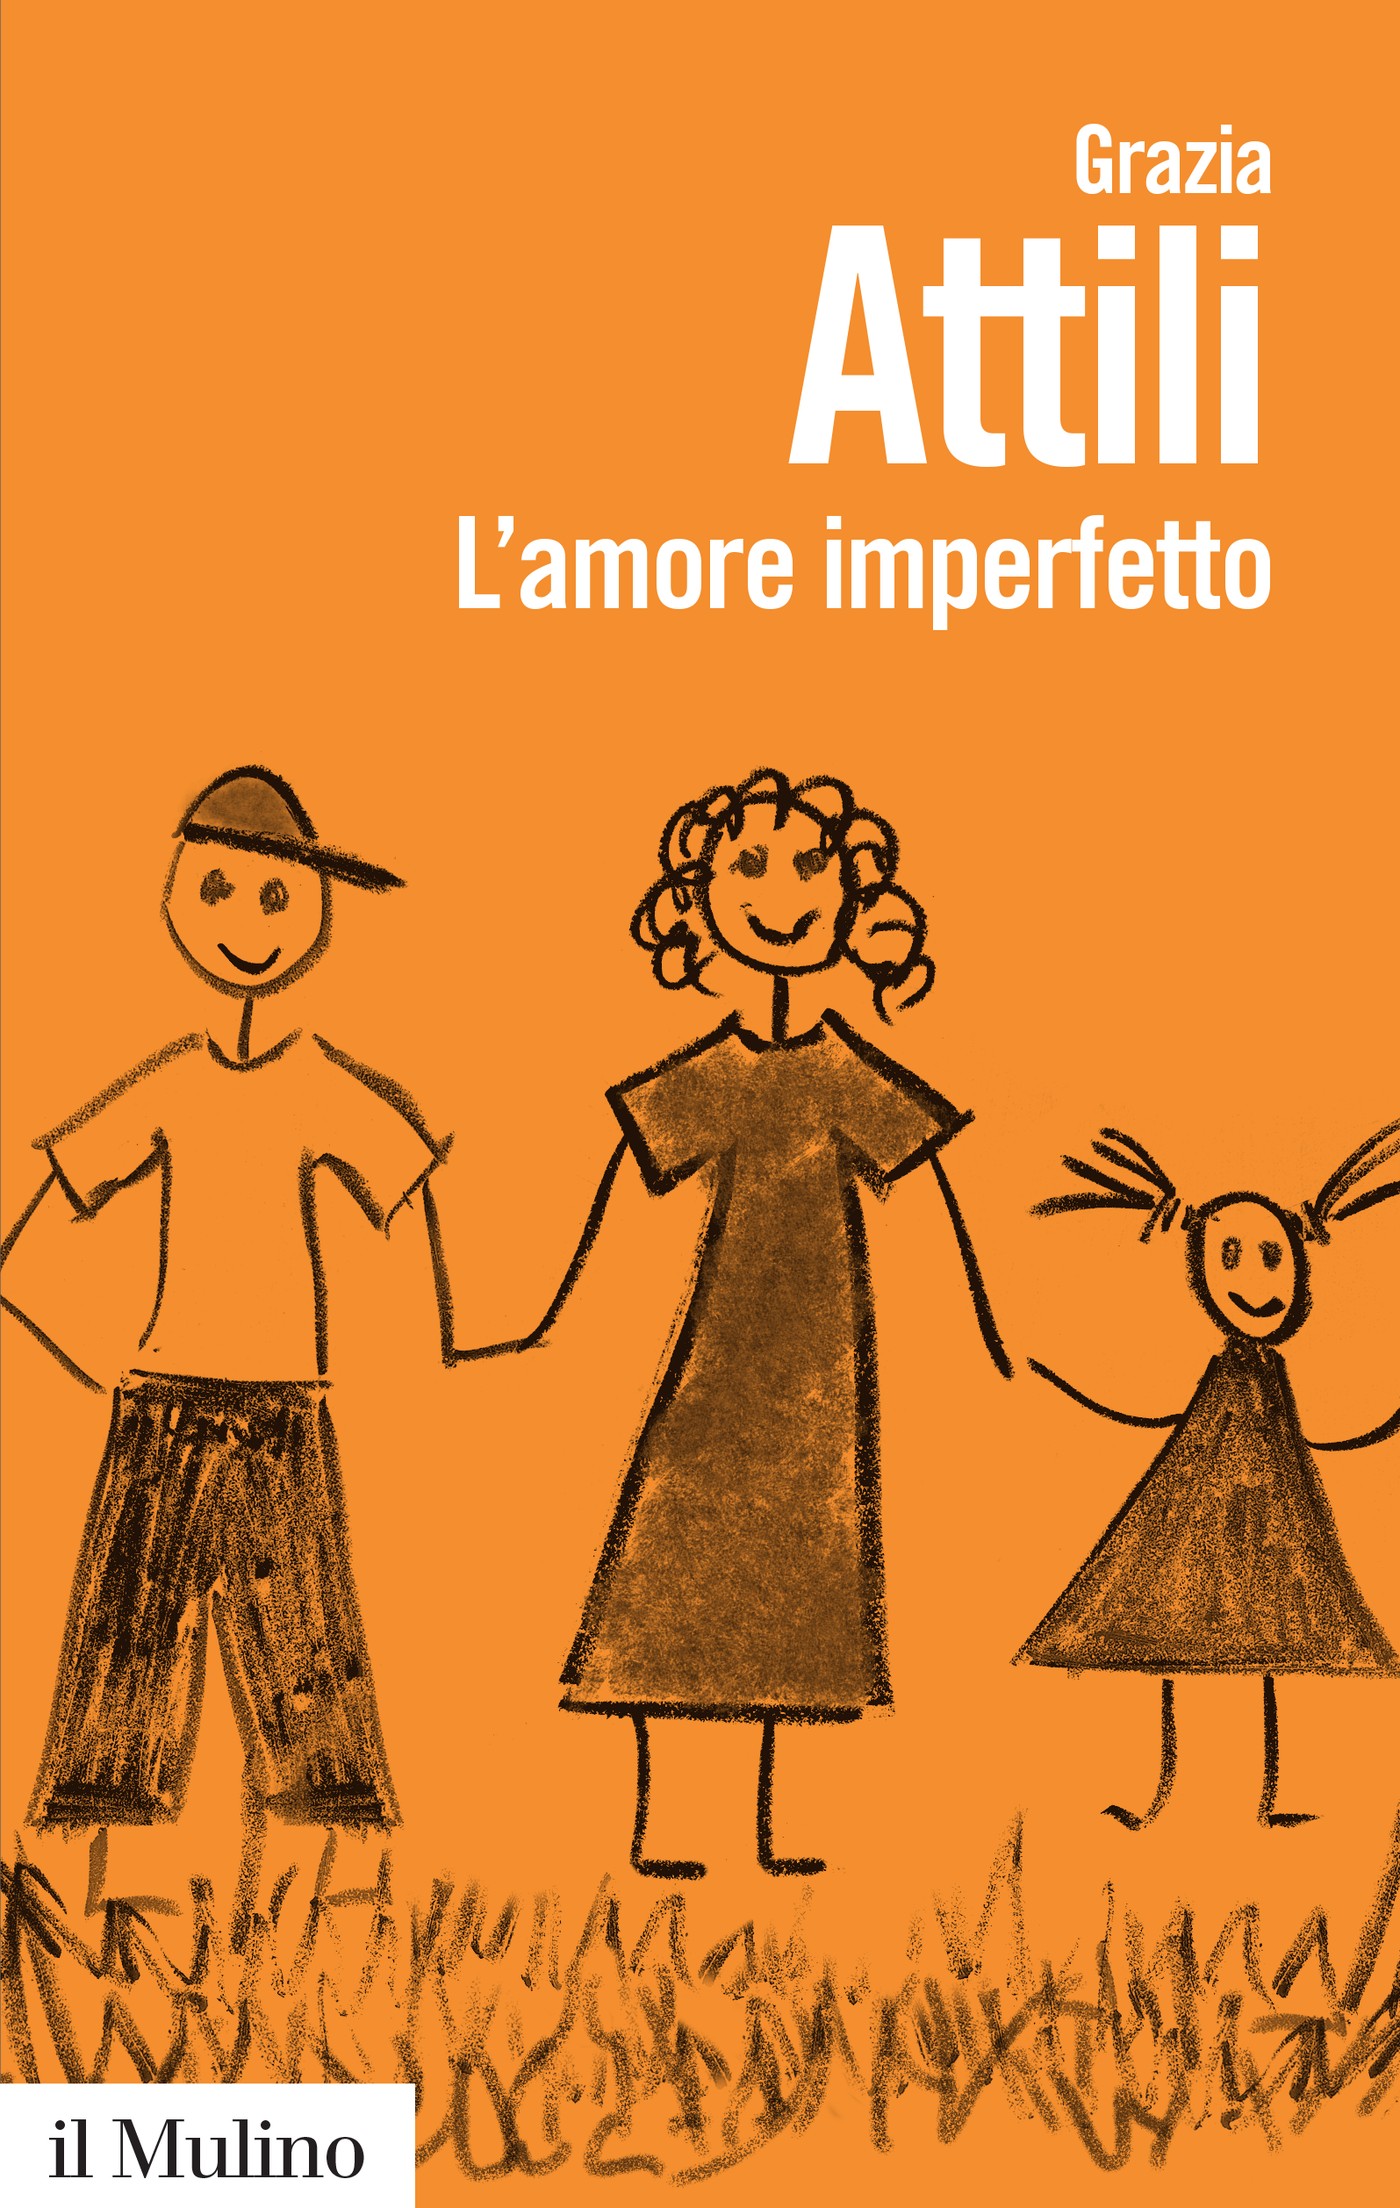 L'amore imperfetto - Librerie.coop